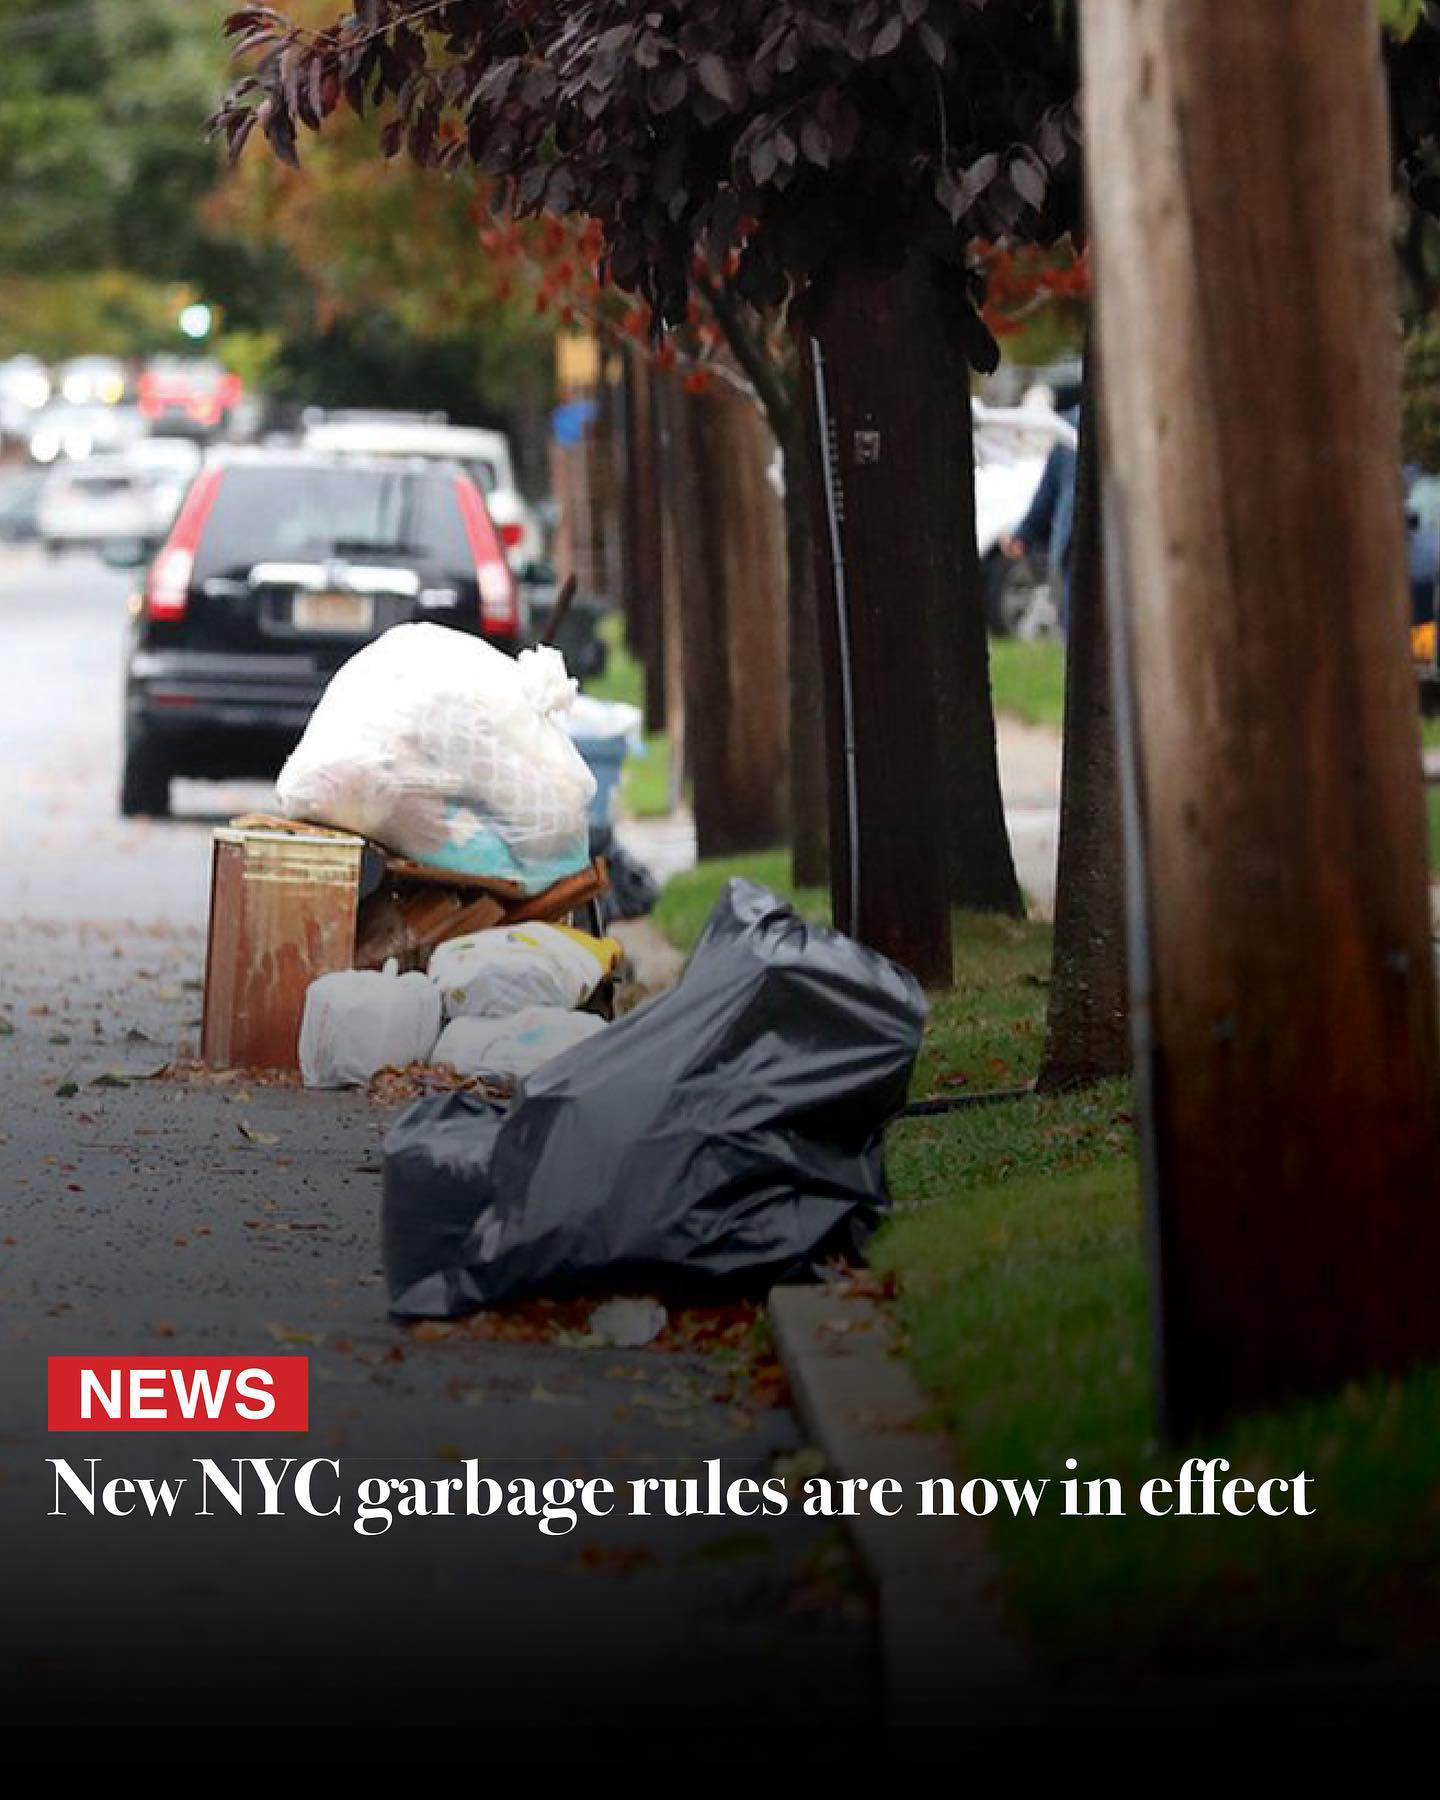 image  1 New York City has introduced new garbage rules to curb rat infestation and to make the streets clean